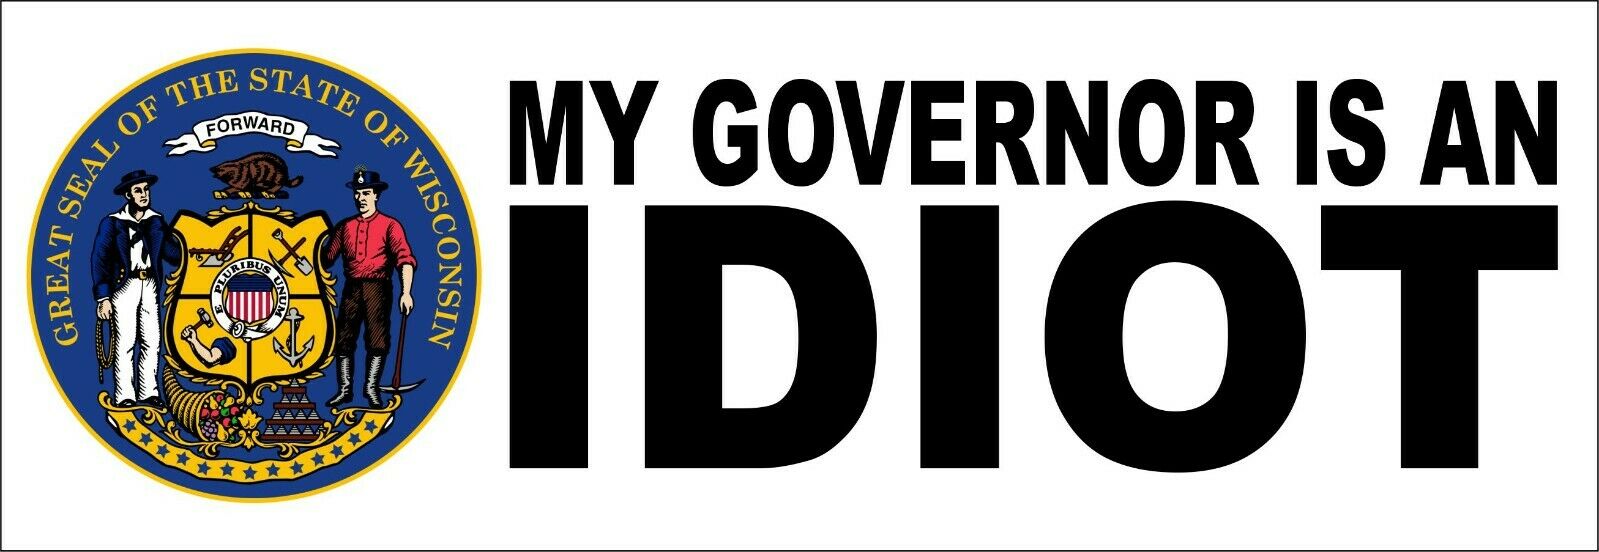 My governor is an idiot bumper sticker - Wisconsin Version - 8.8" x 3" Decal - Powercall Sirens LLC